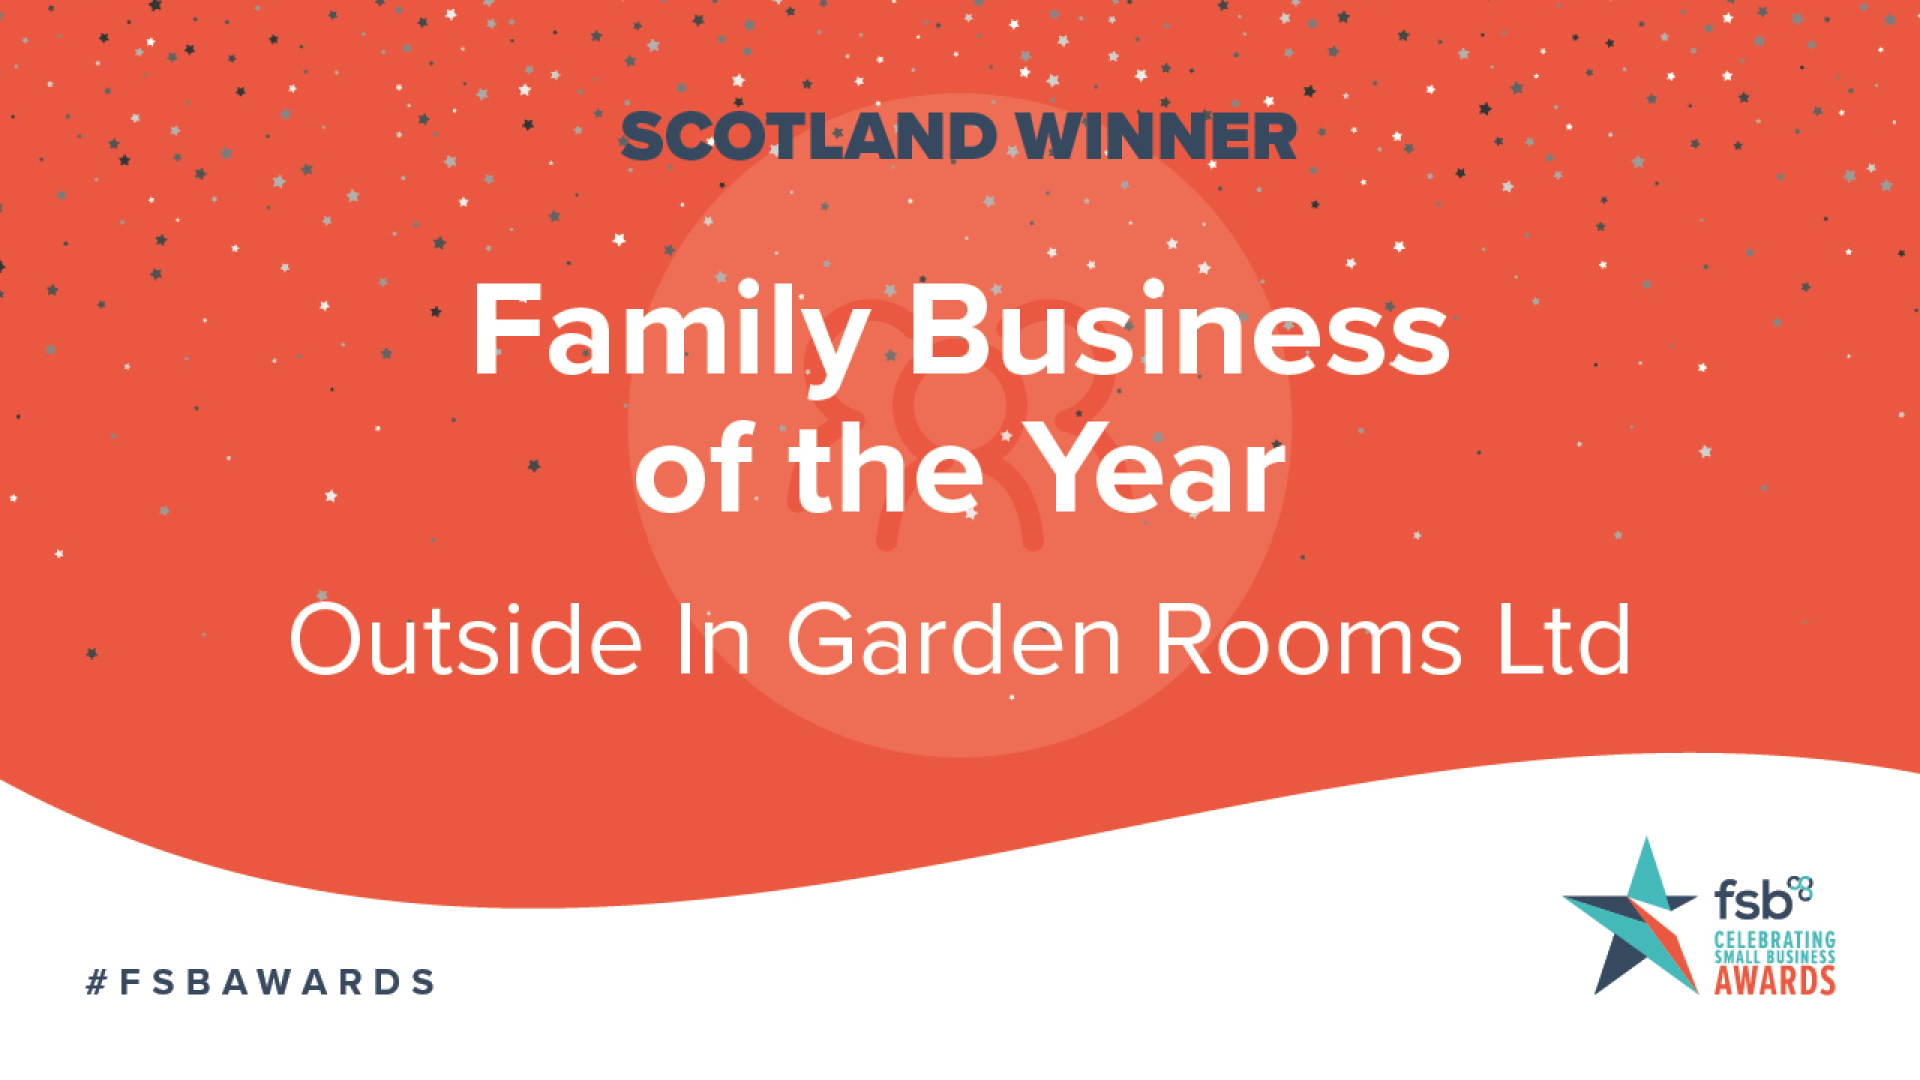 Family business of the year 22